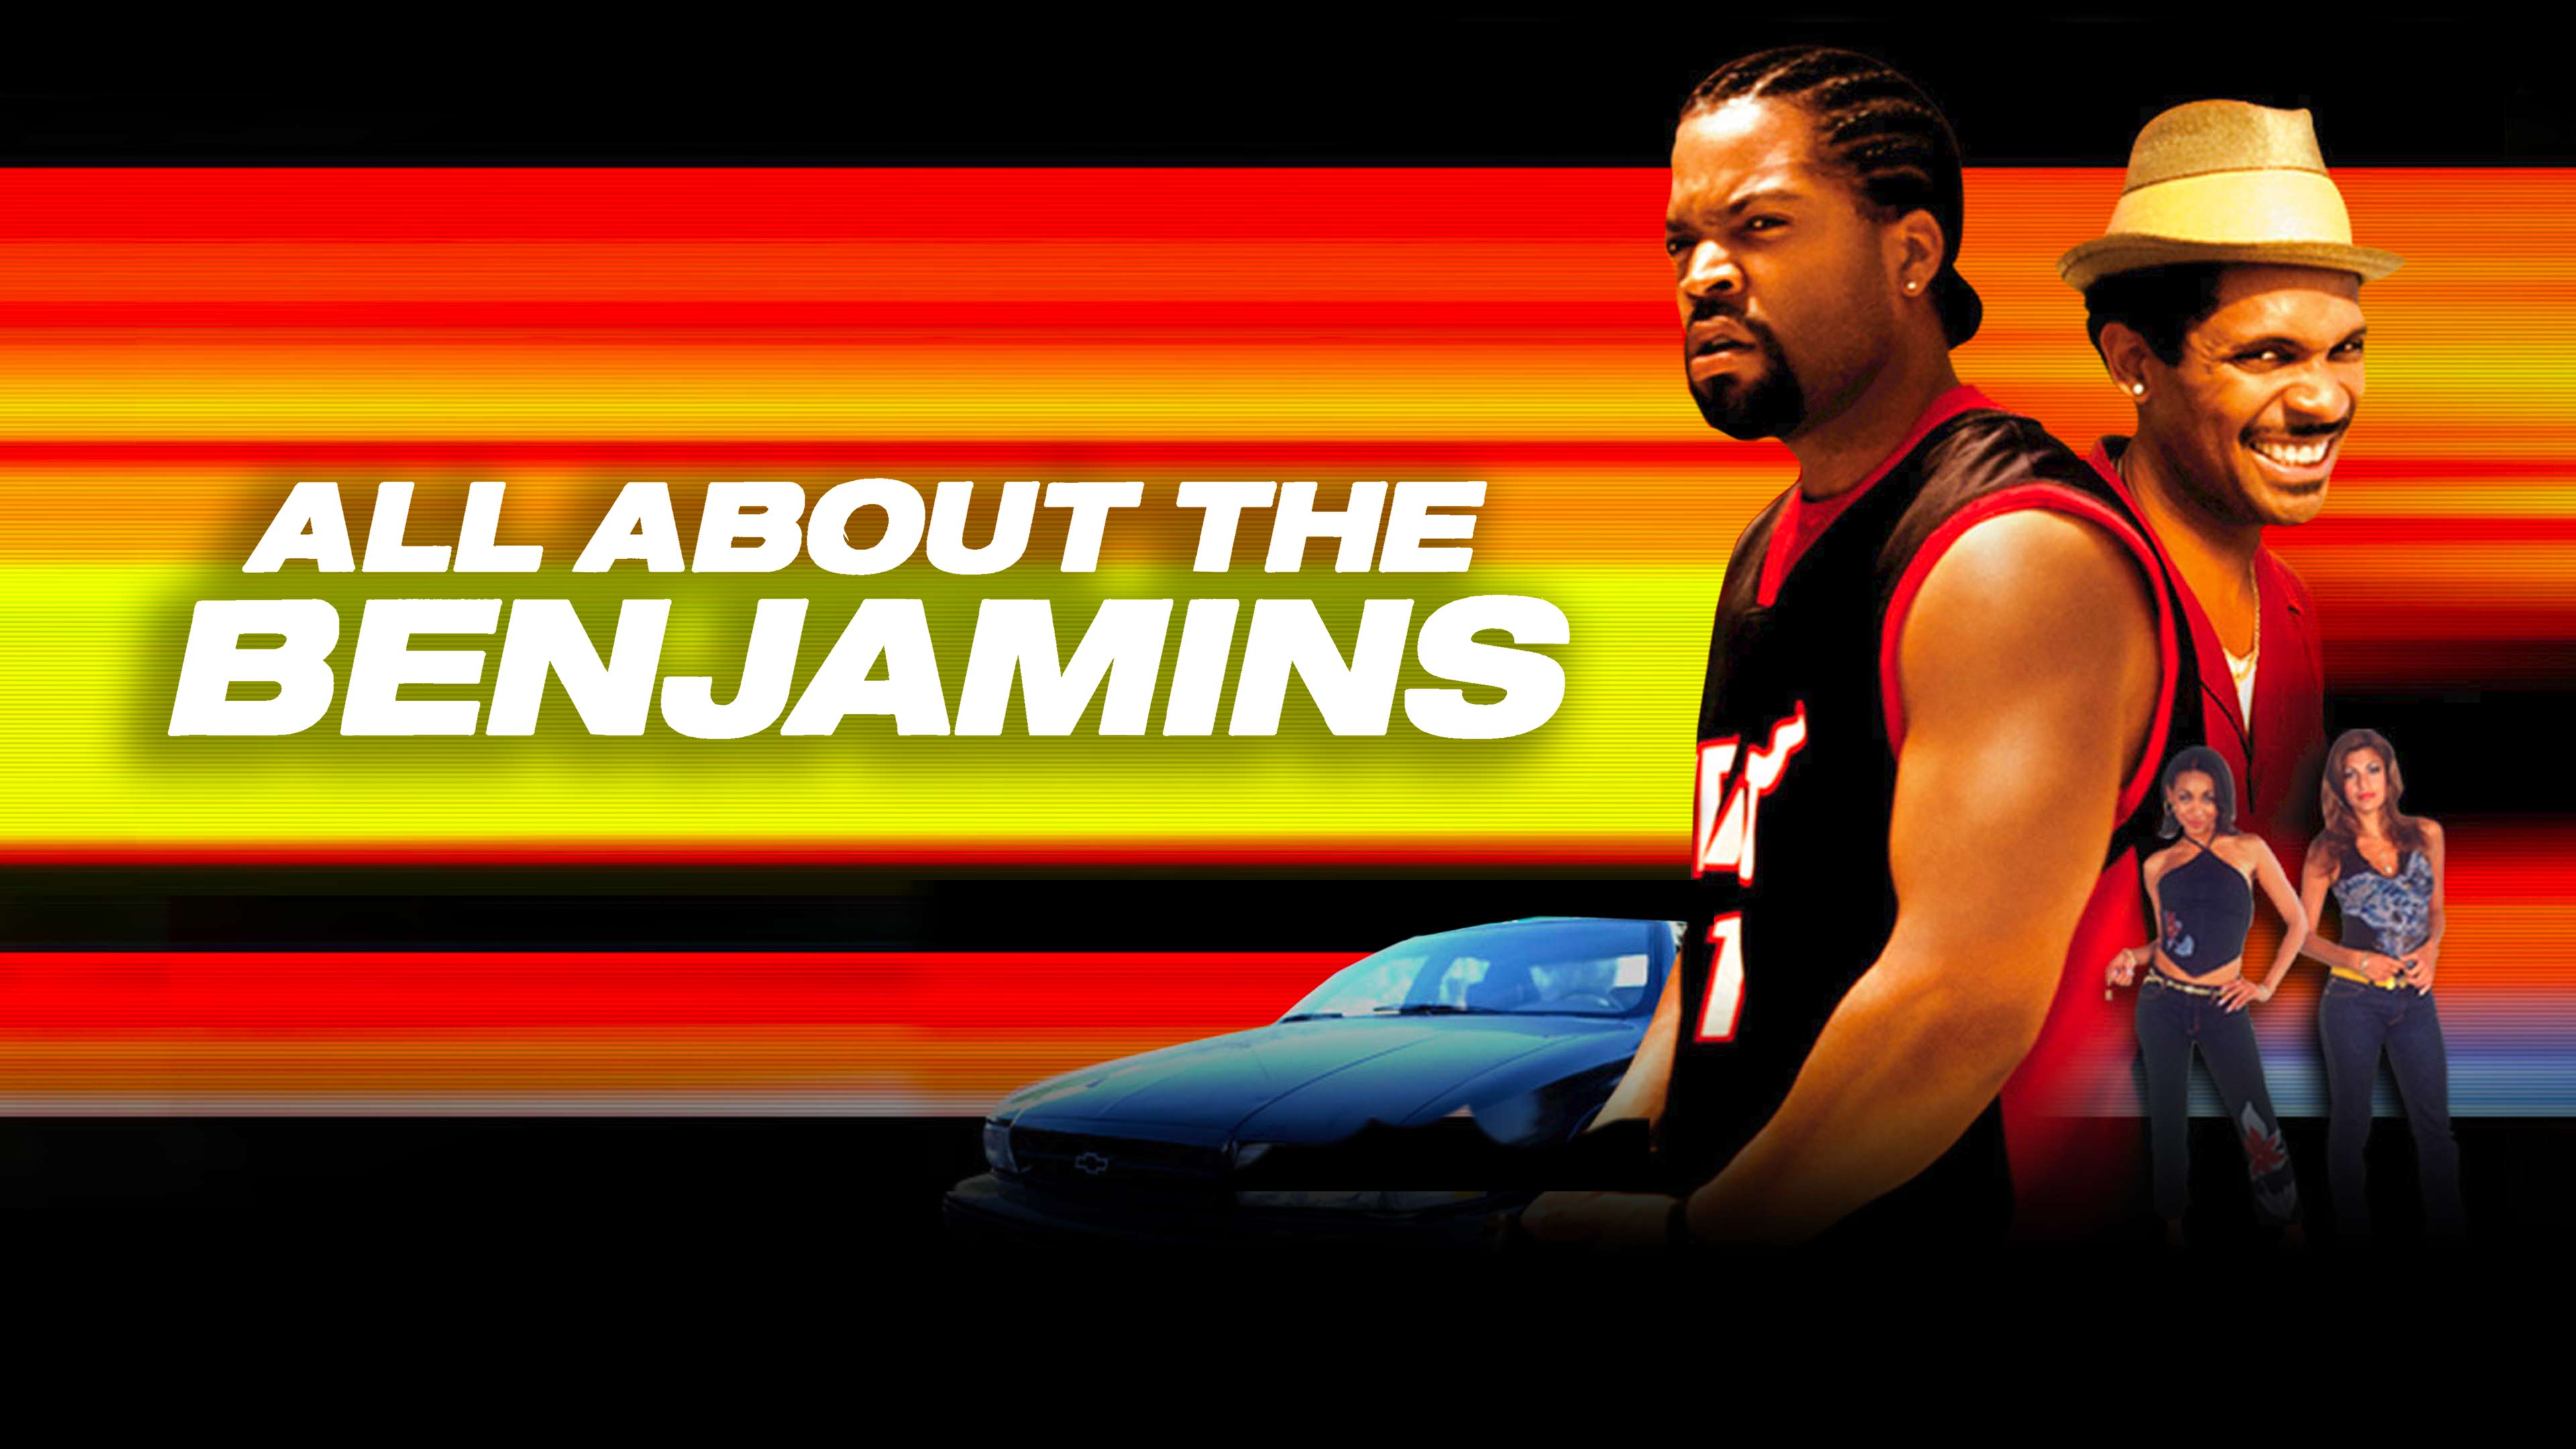 All About The Benjamins movie poster